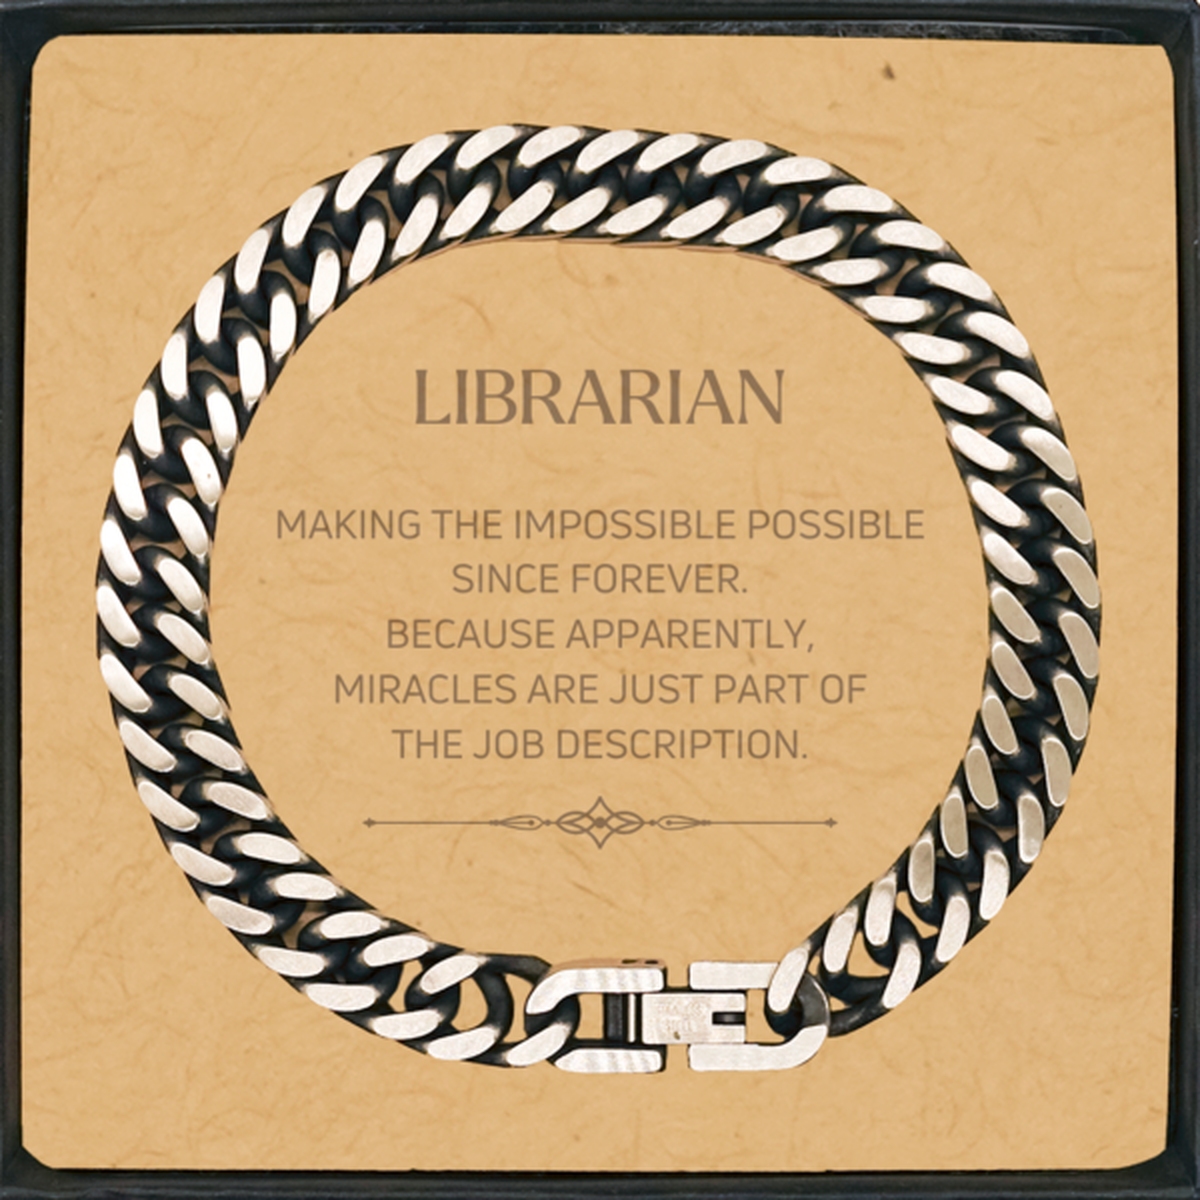 Funny Librarian Gifts, Miracles are just part of the job description, Inspirational Birthday Cuban Link Chain Bracelet For Librarian, Men, Women, Coworkers, Friends, Boss